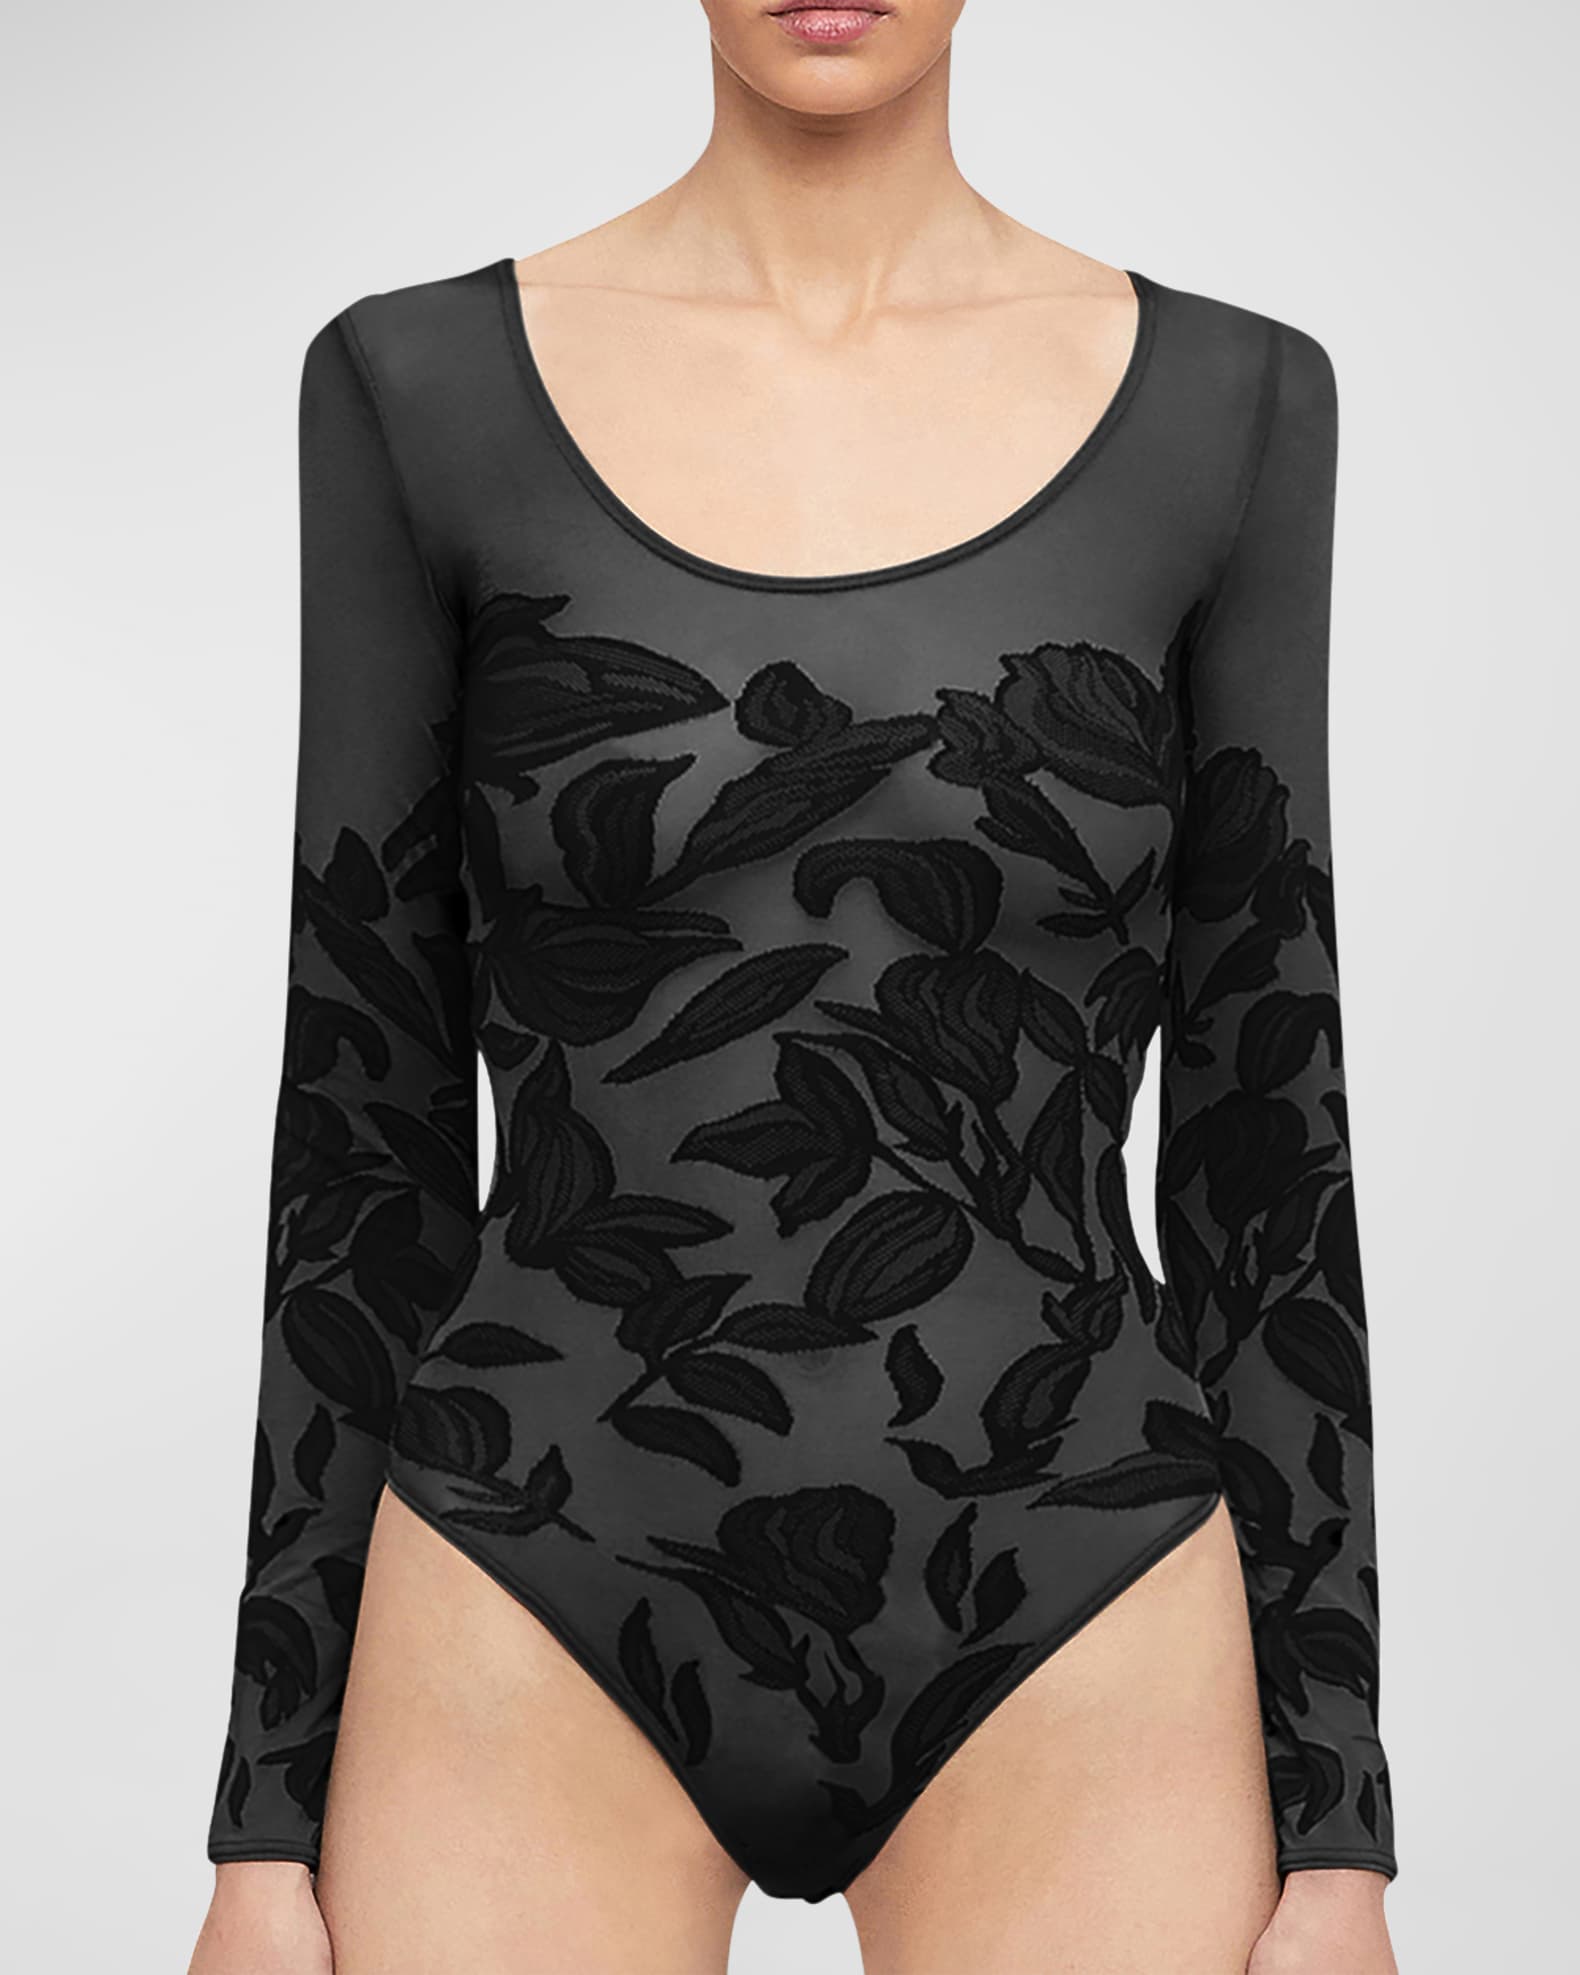 Wolford Louise Long-Sleeve Lace Bodysuit  Lace bodysuit long sleeve, Lace  bodysuit, Bodysuit